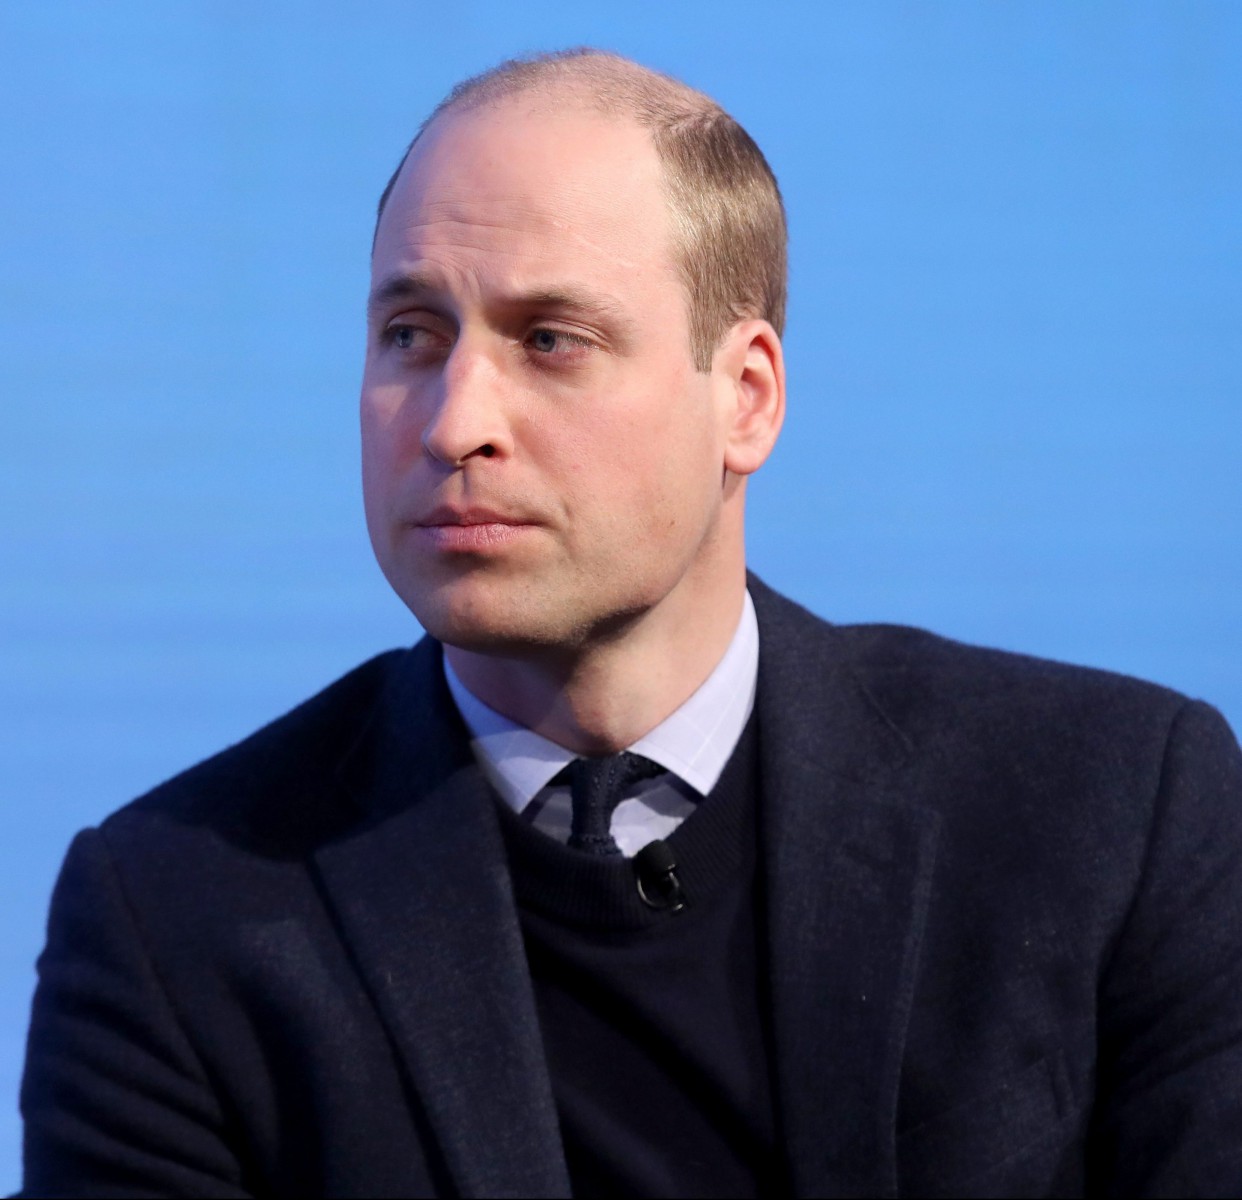 Prince William will shoulder greater responsibility yet is unlikely to reconcile with his brother Harry